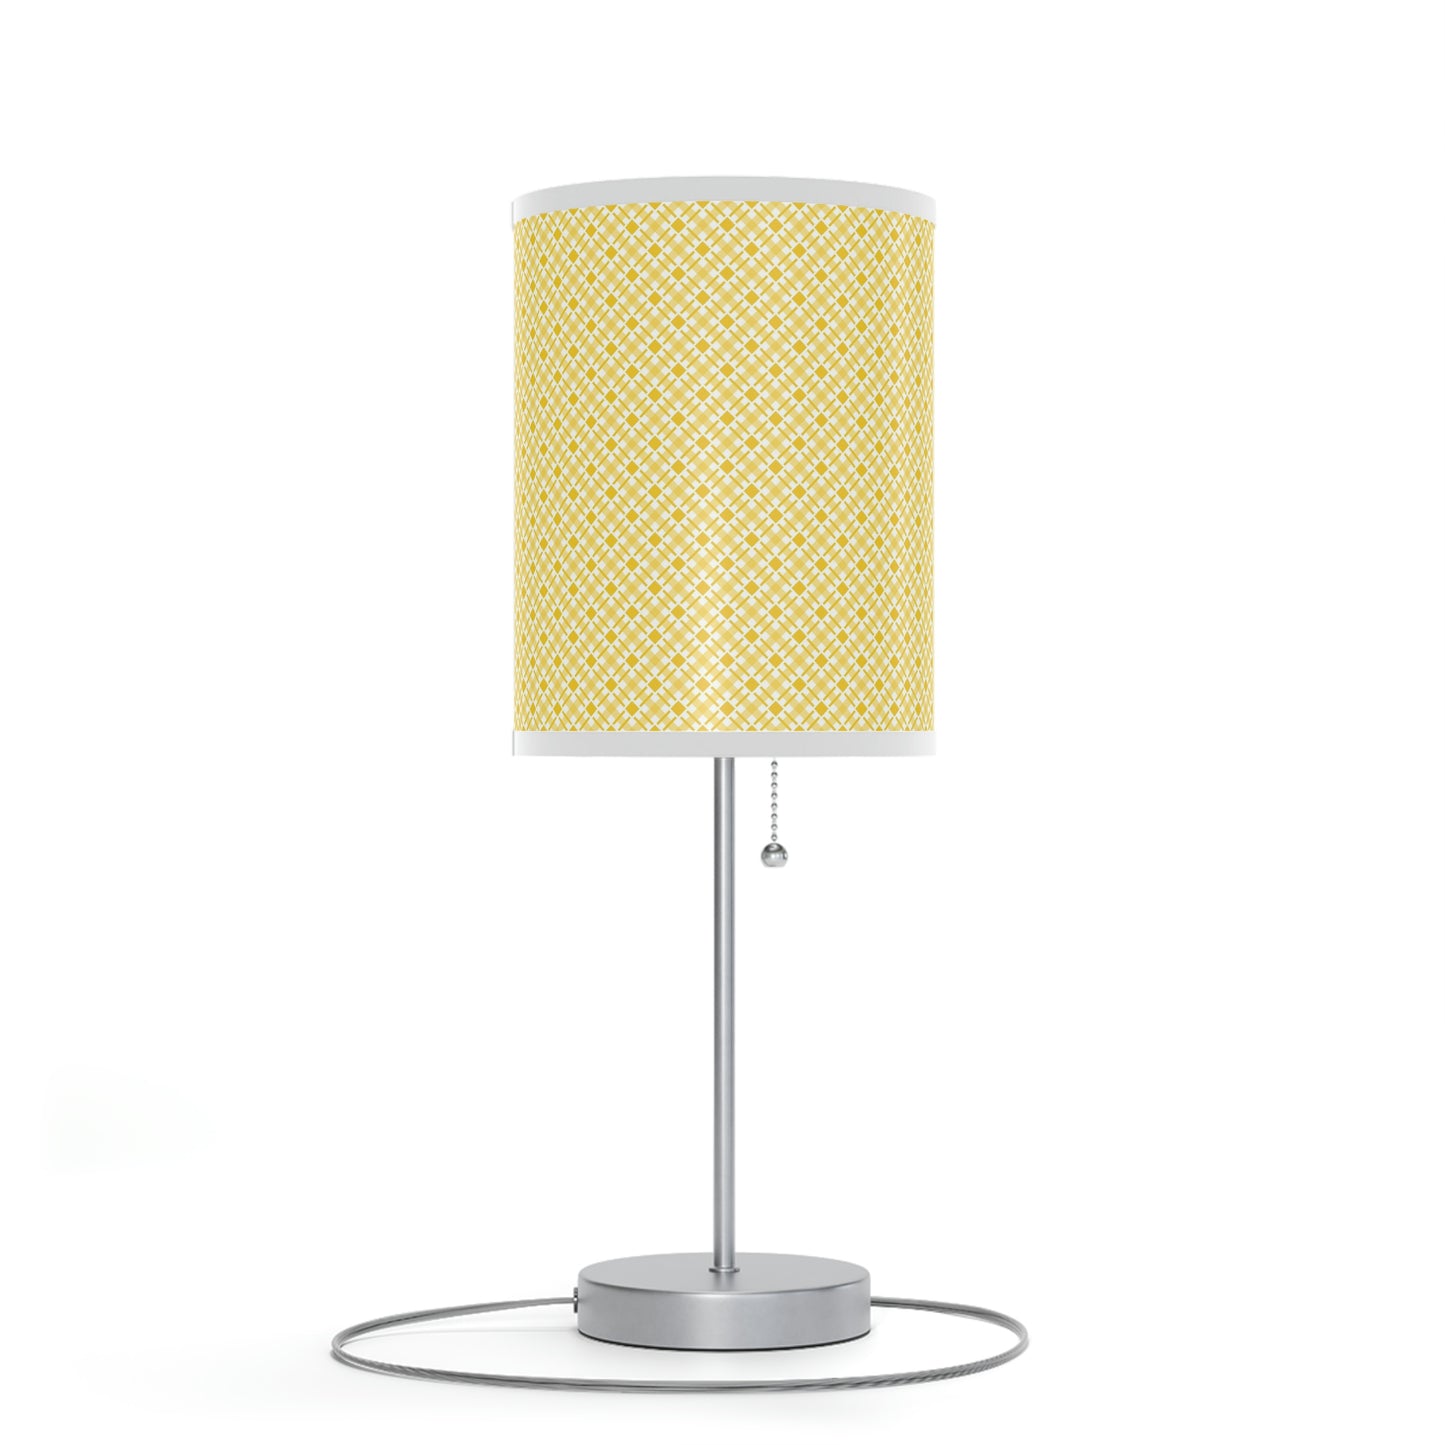 yellow pattern baby nursery lamp, yellow nursery table lamp with yellow pattern for kids room